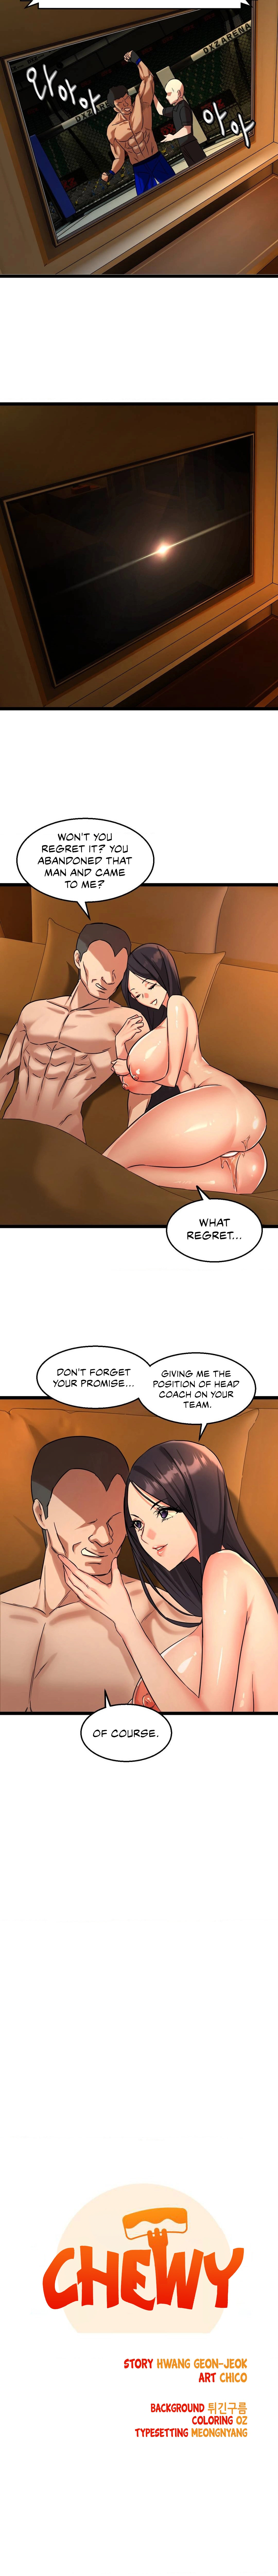 Chewy - Chapter 1 Page 7